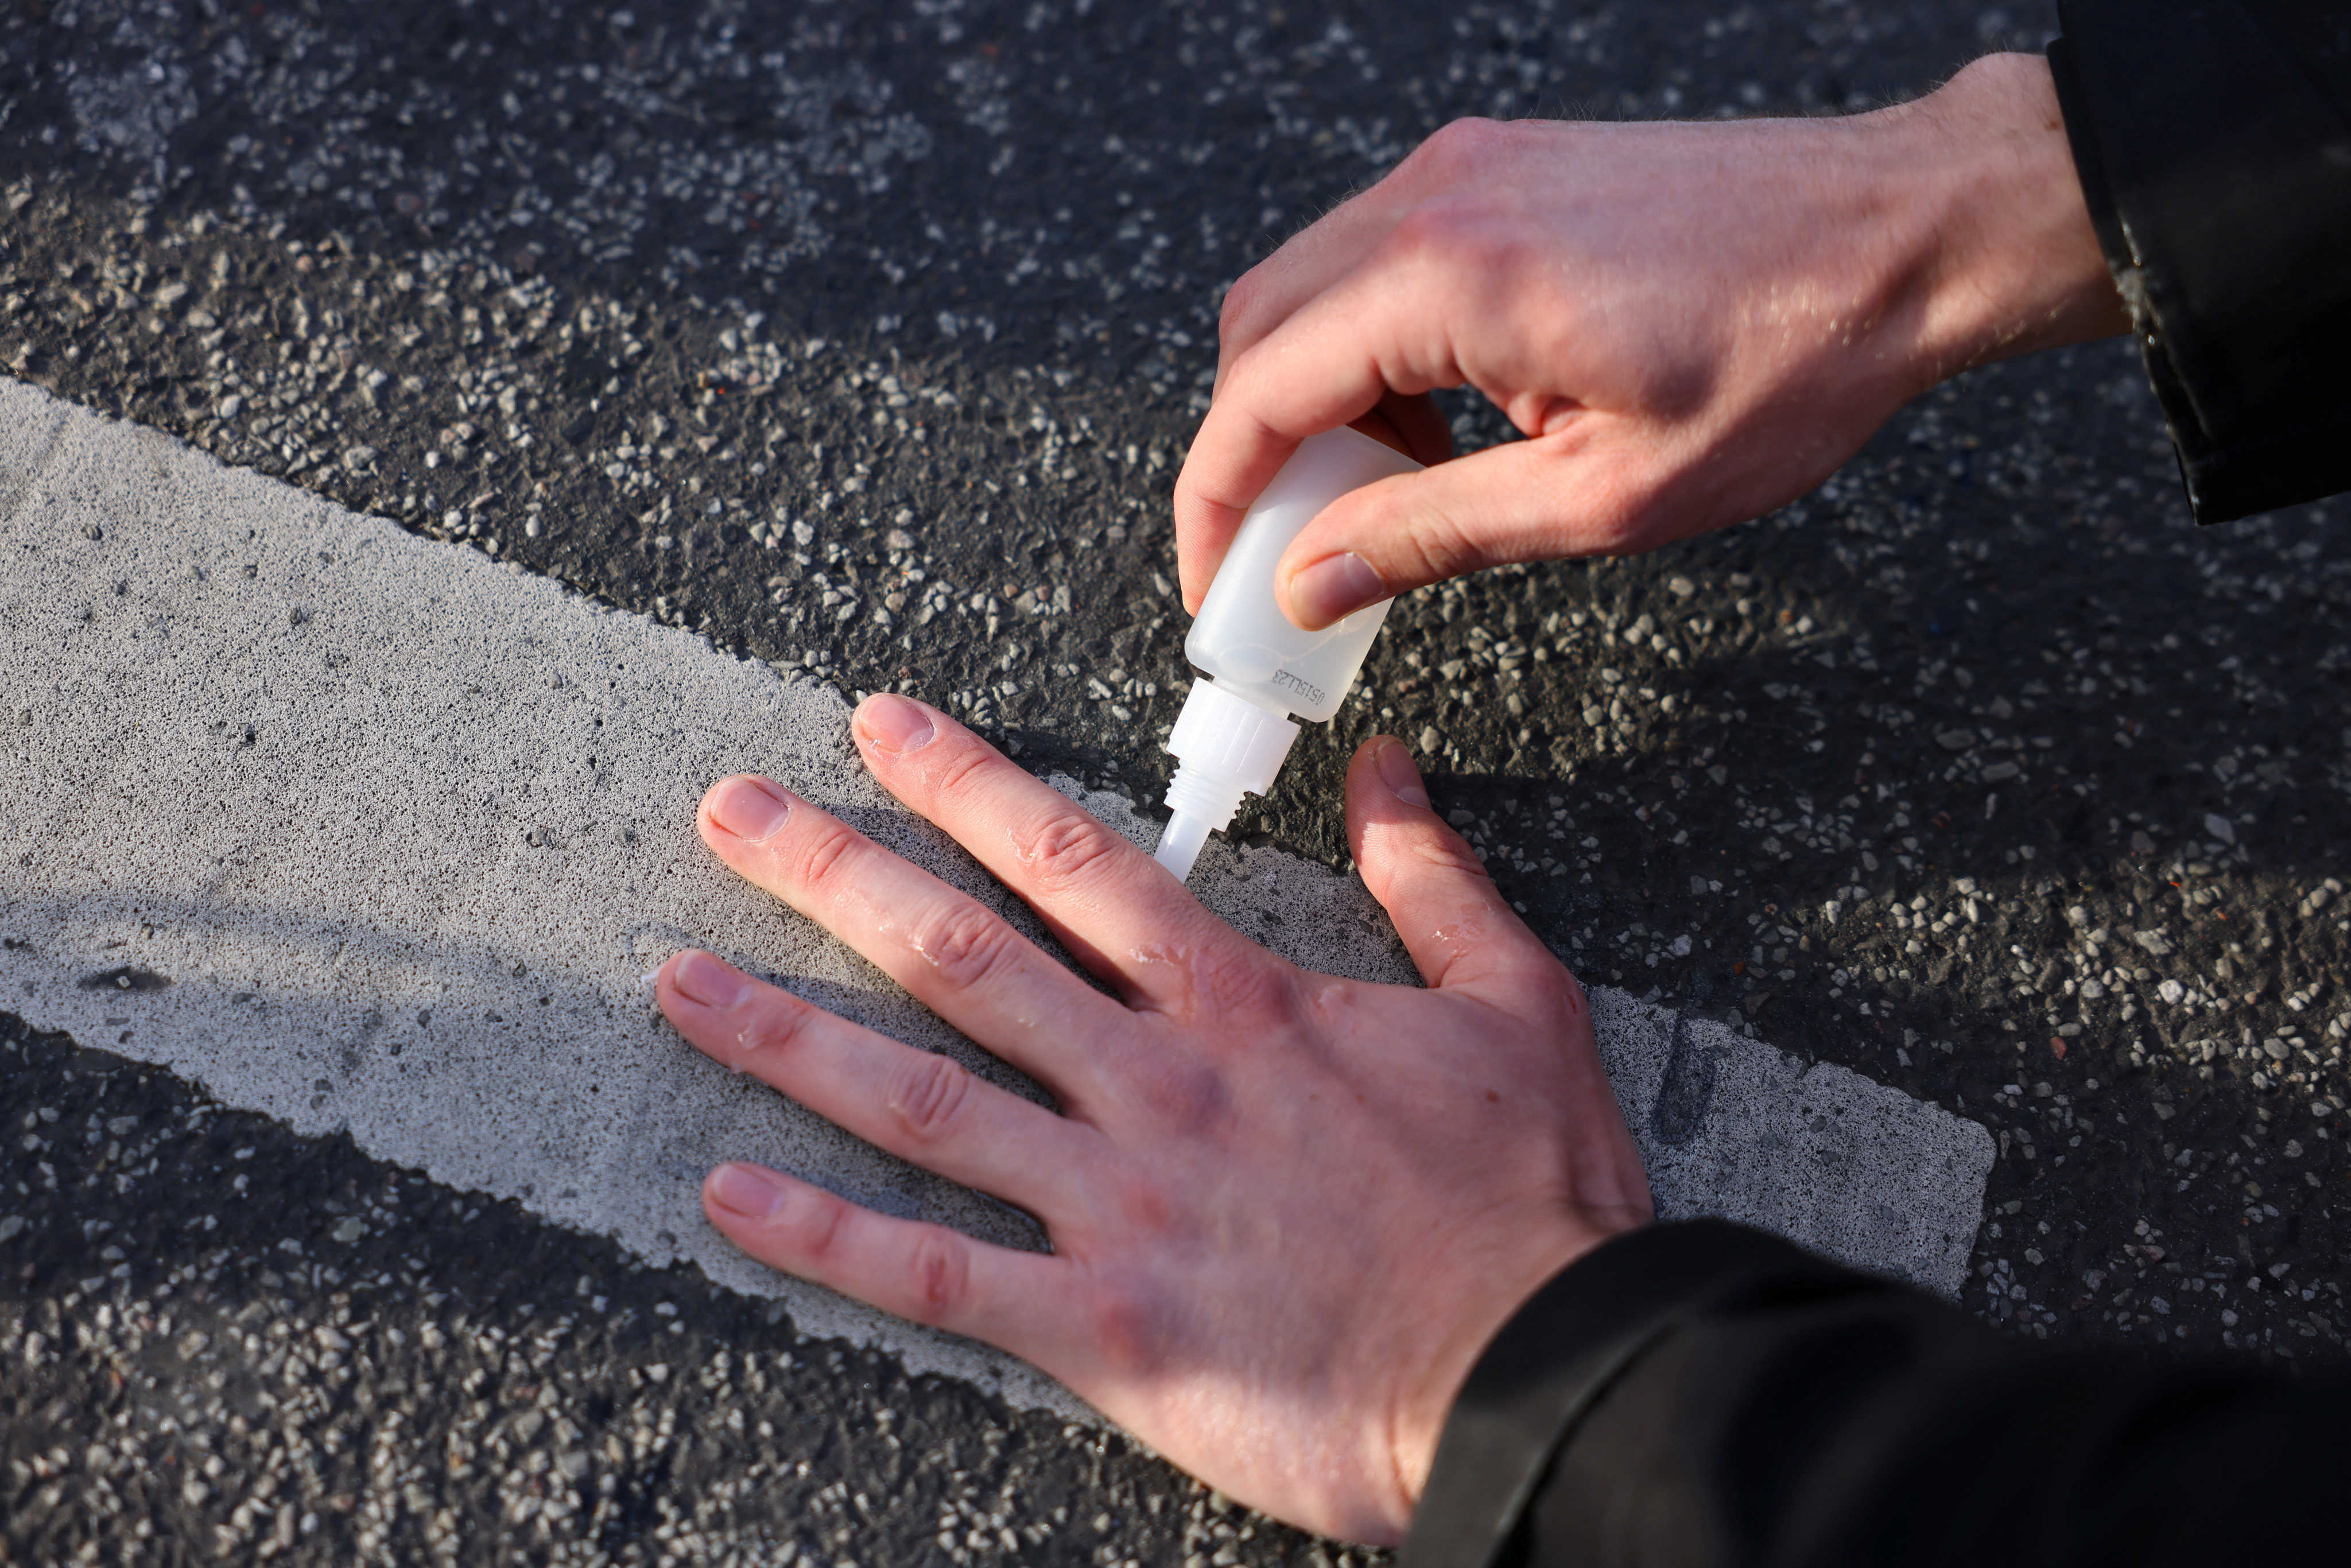 An activist in Berlin, Germany, glues their hand on a road on Monday during a climate change protest. Photo: Reuters